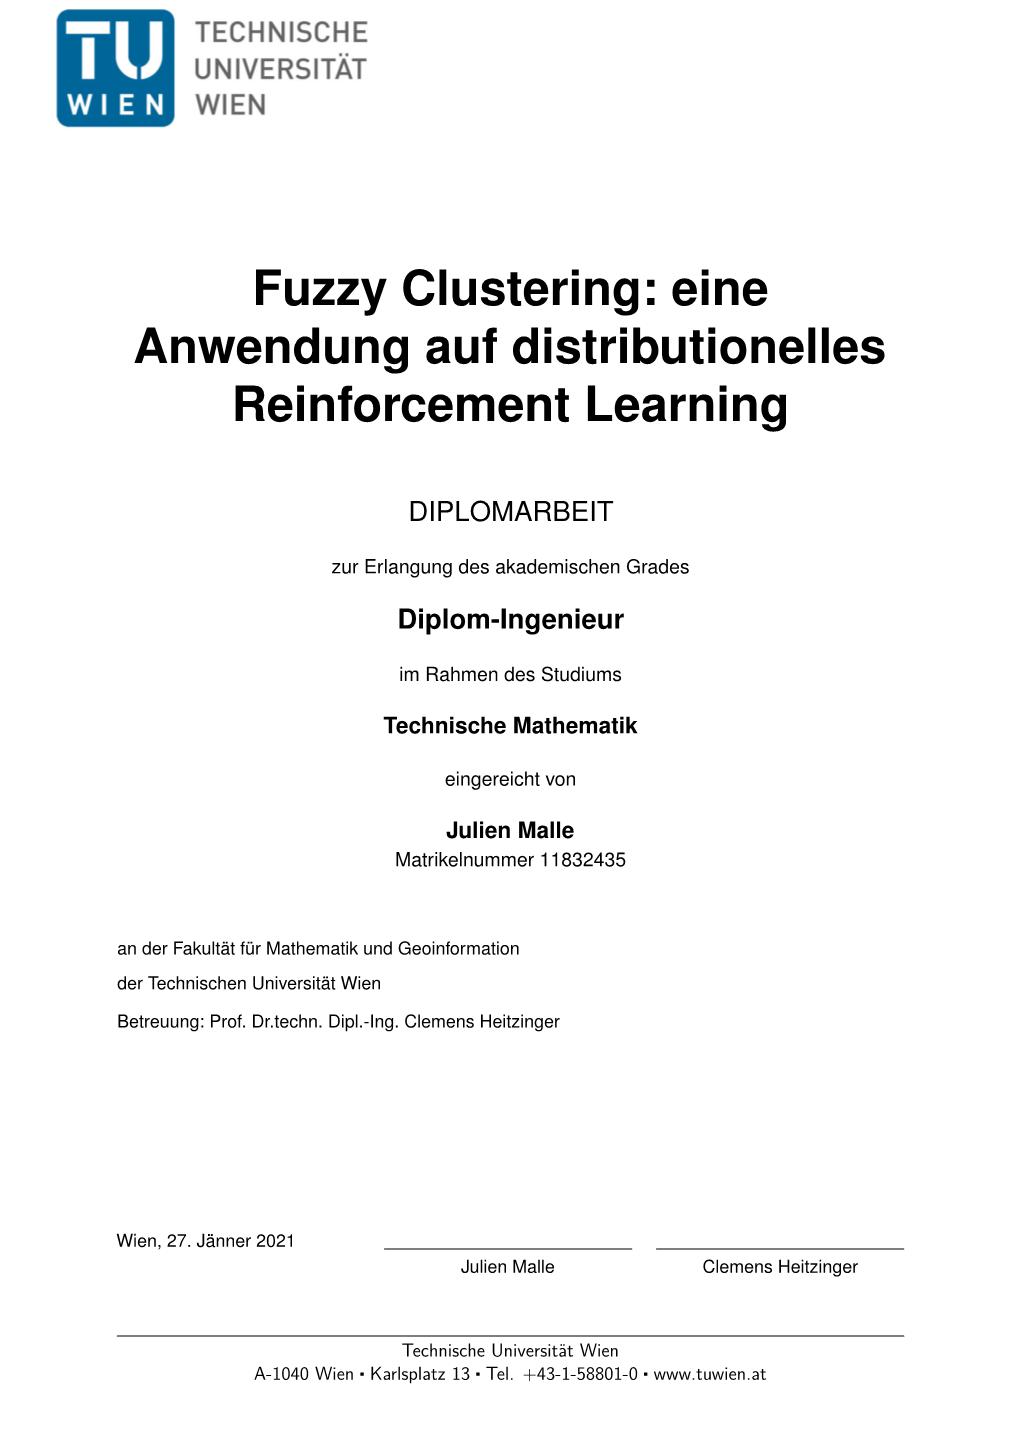 Fuzzy Clustering: an Application to Distributional Reinforcement Learning